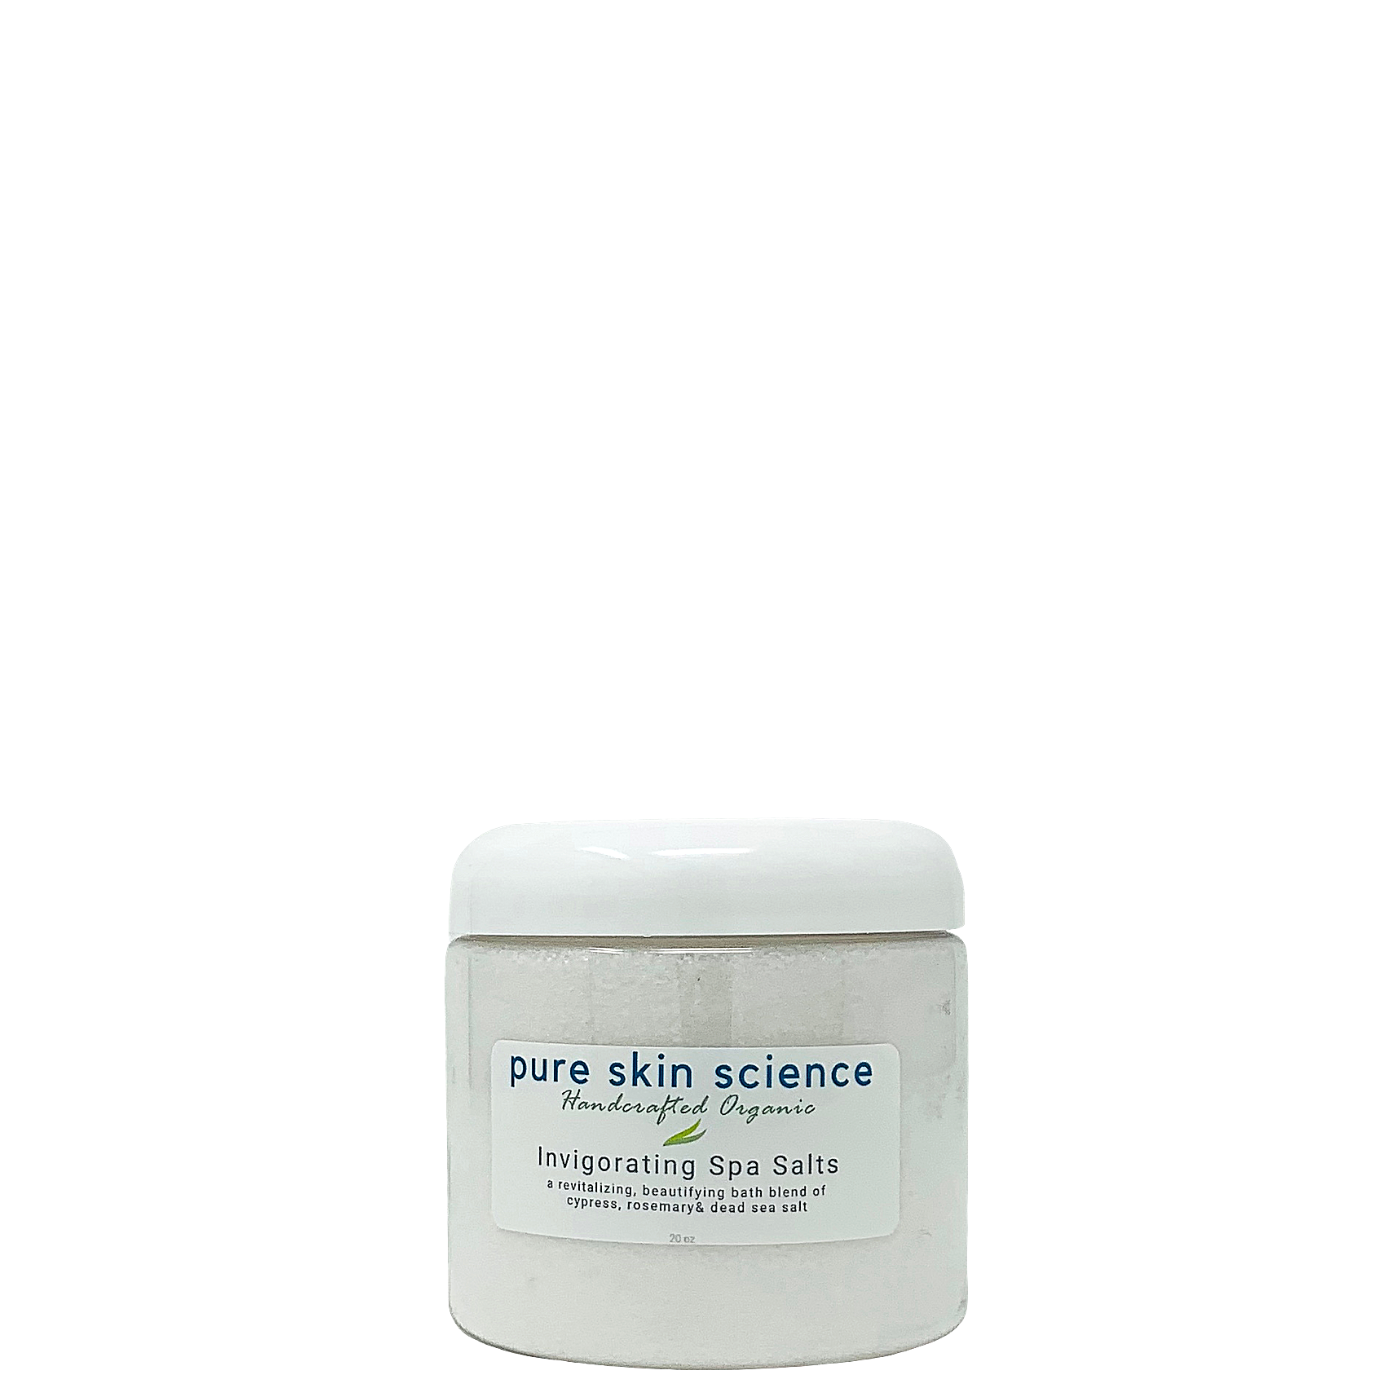 Ancient Mineral Spa Salts by Pure Skin Science: Cypress, Rosemary & Dead Sea Salt